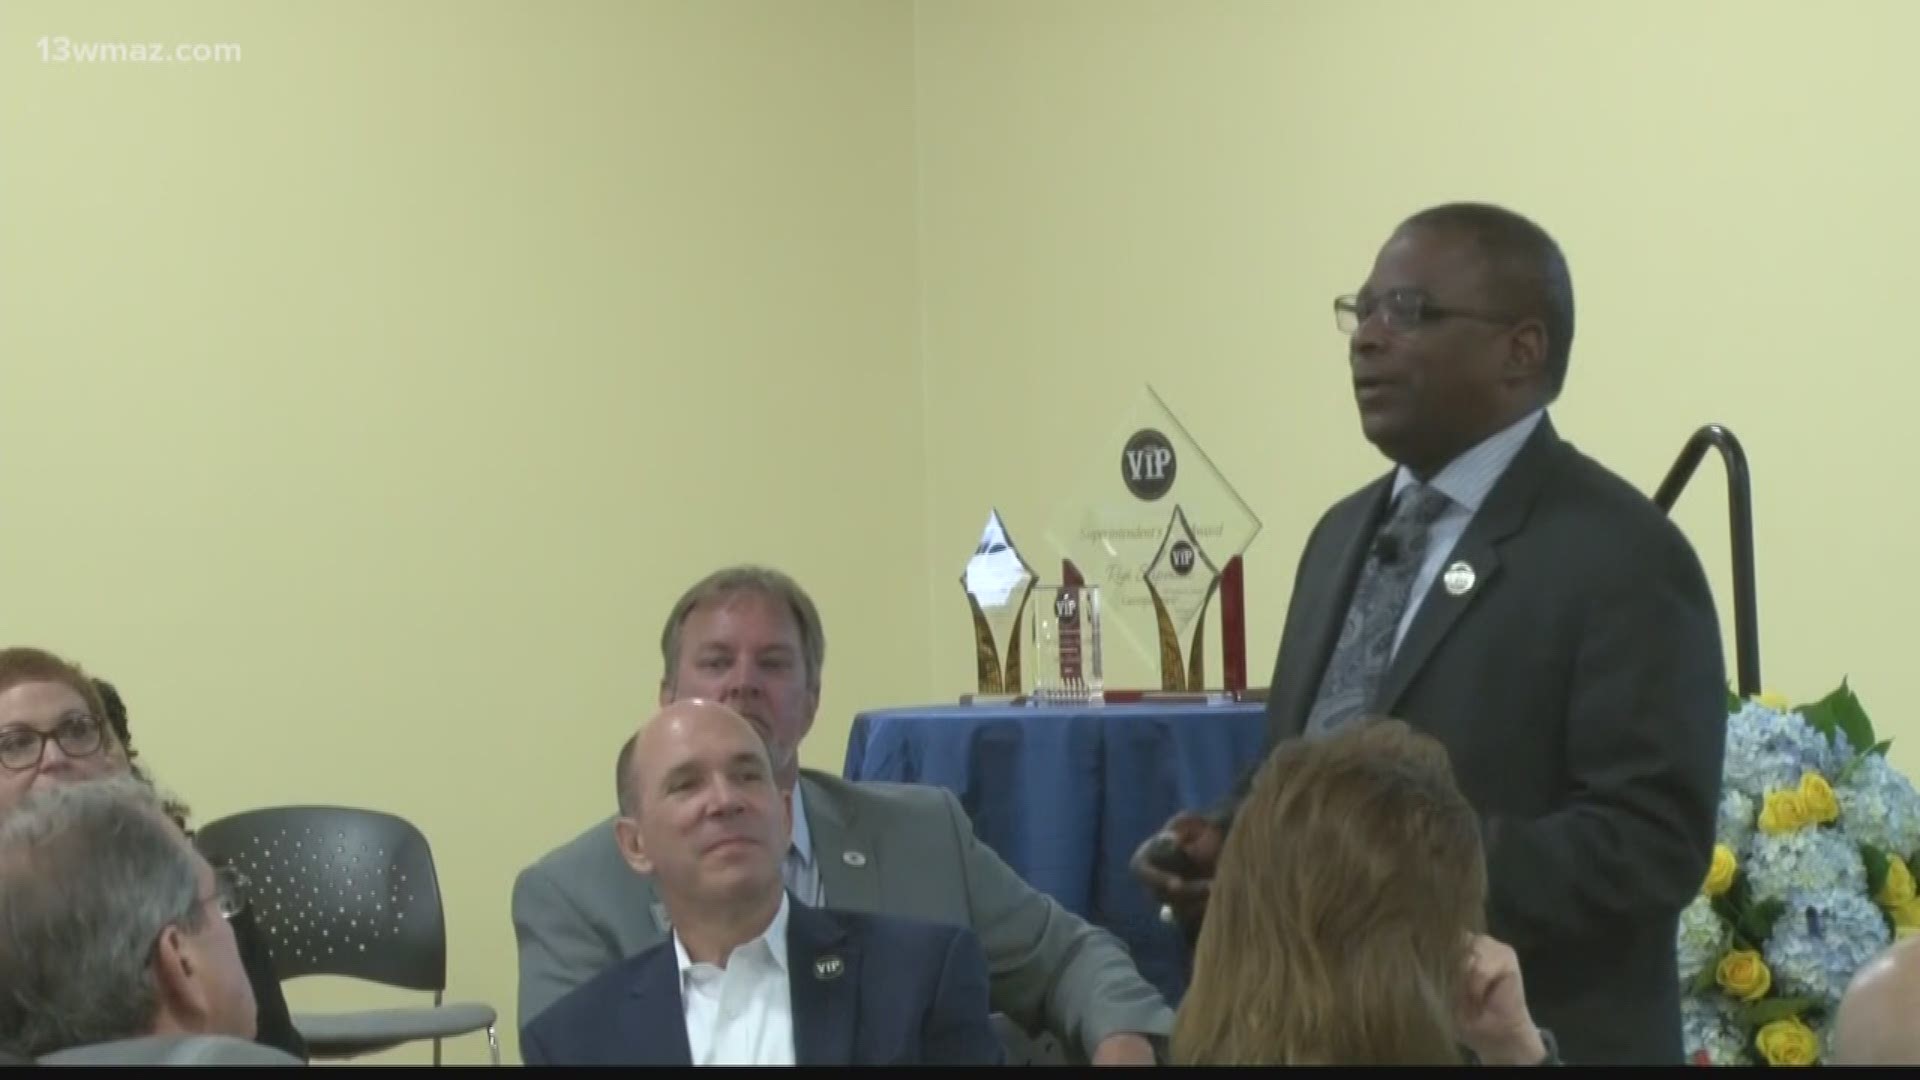 Bibb County Schools are improving, according to Superintendent Curtis Jones who talked about the district's successes today in his state of the district address.